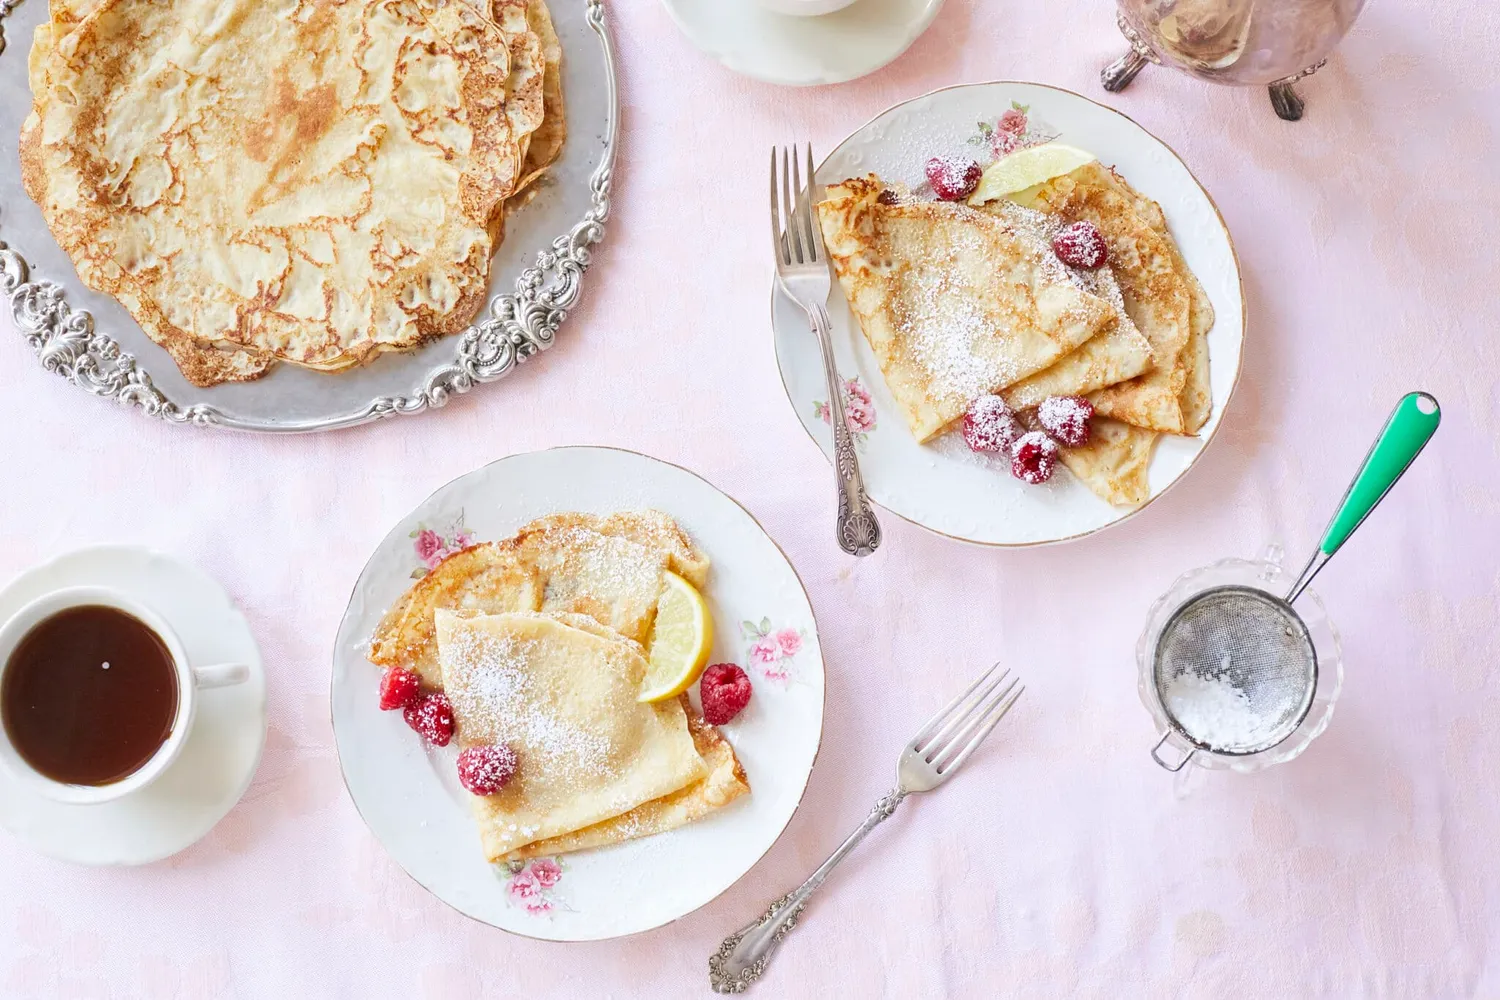 Indulge Your Taste Buds: Finding the Best Crepes Near You